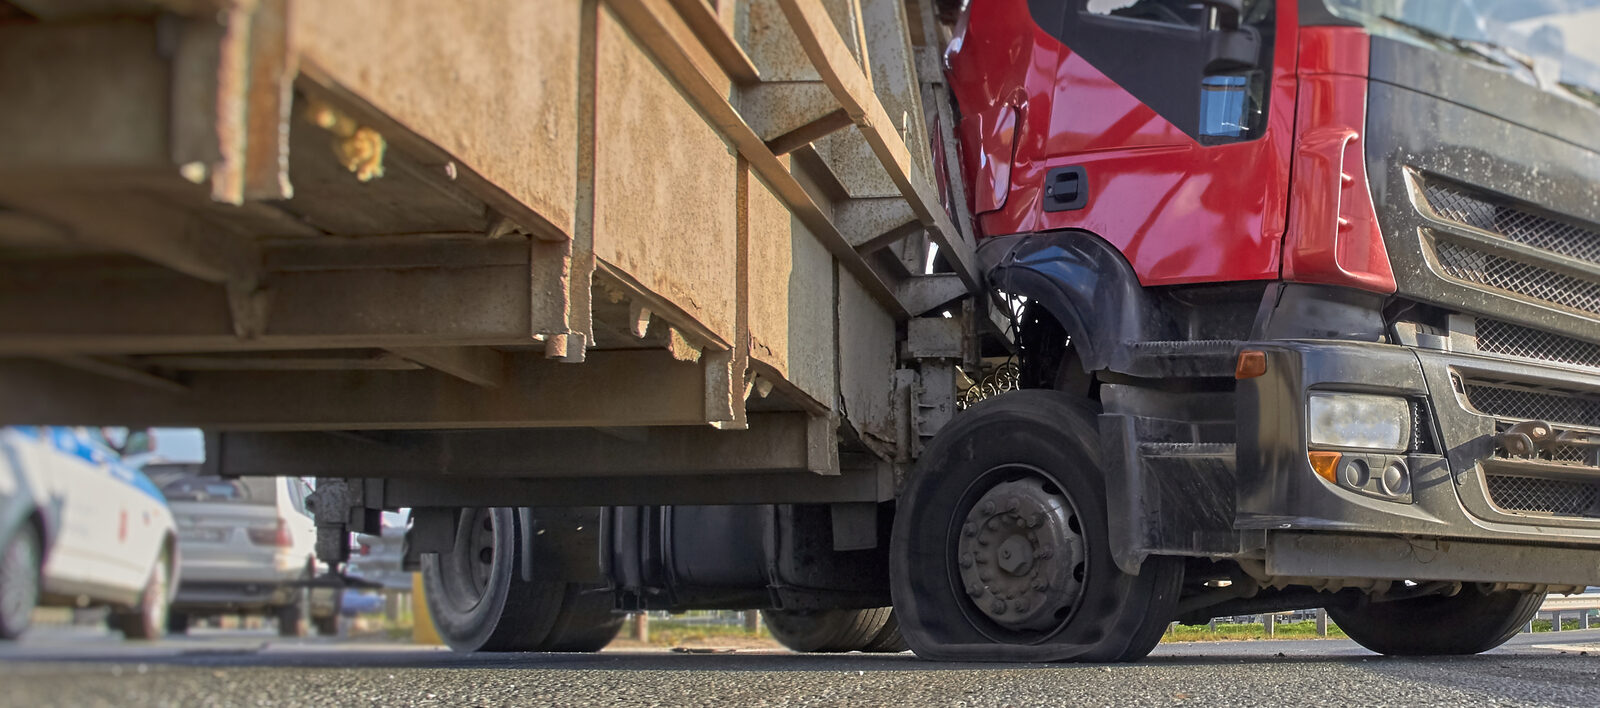 Truck Accident Law Firm for Illinois Cases | Bloomington, IL Truck Crash Attorneys | Burger Law